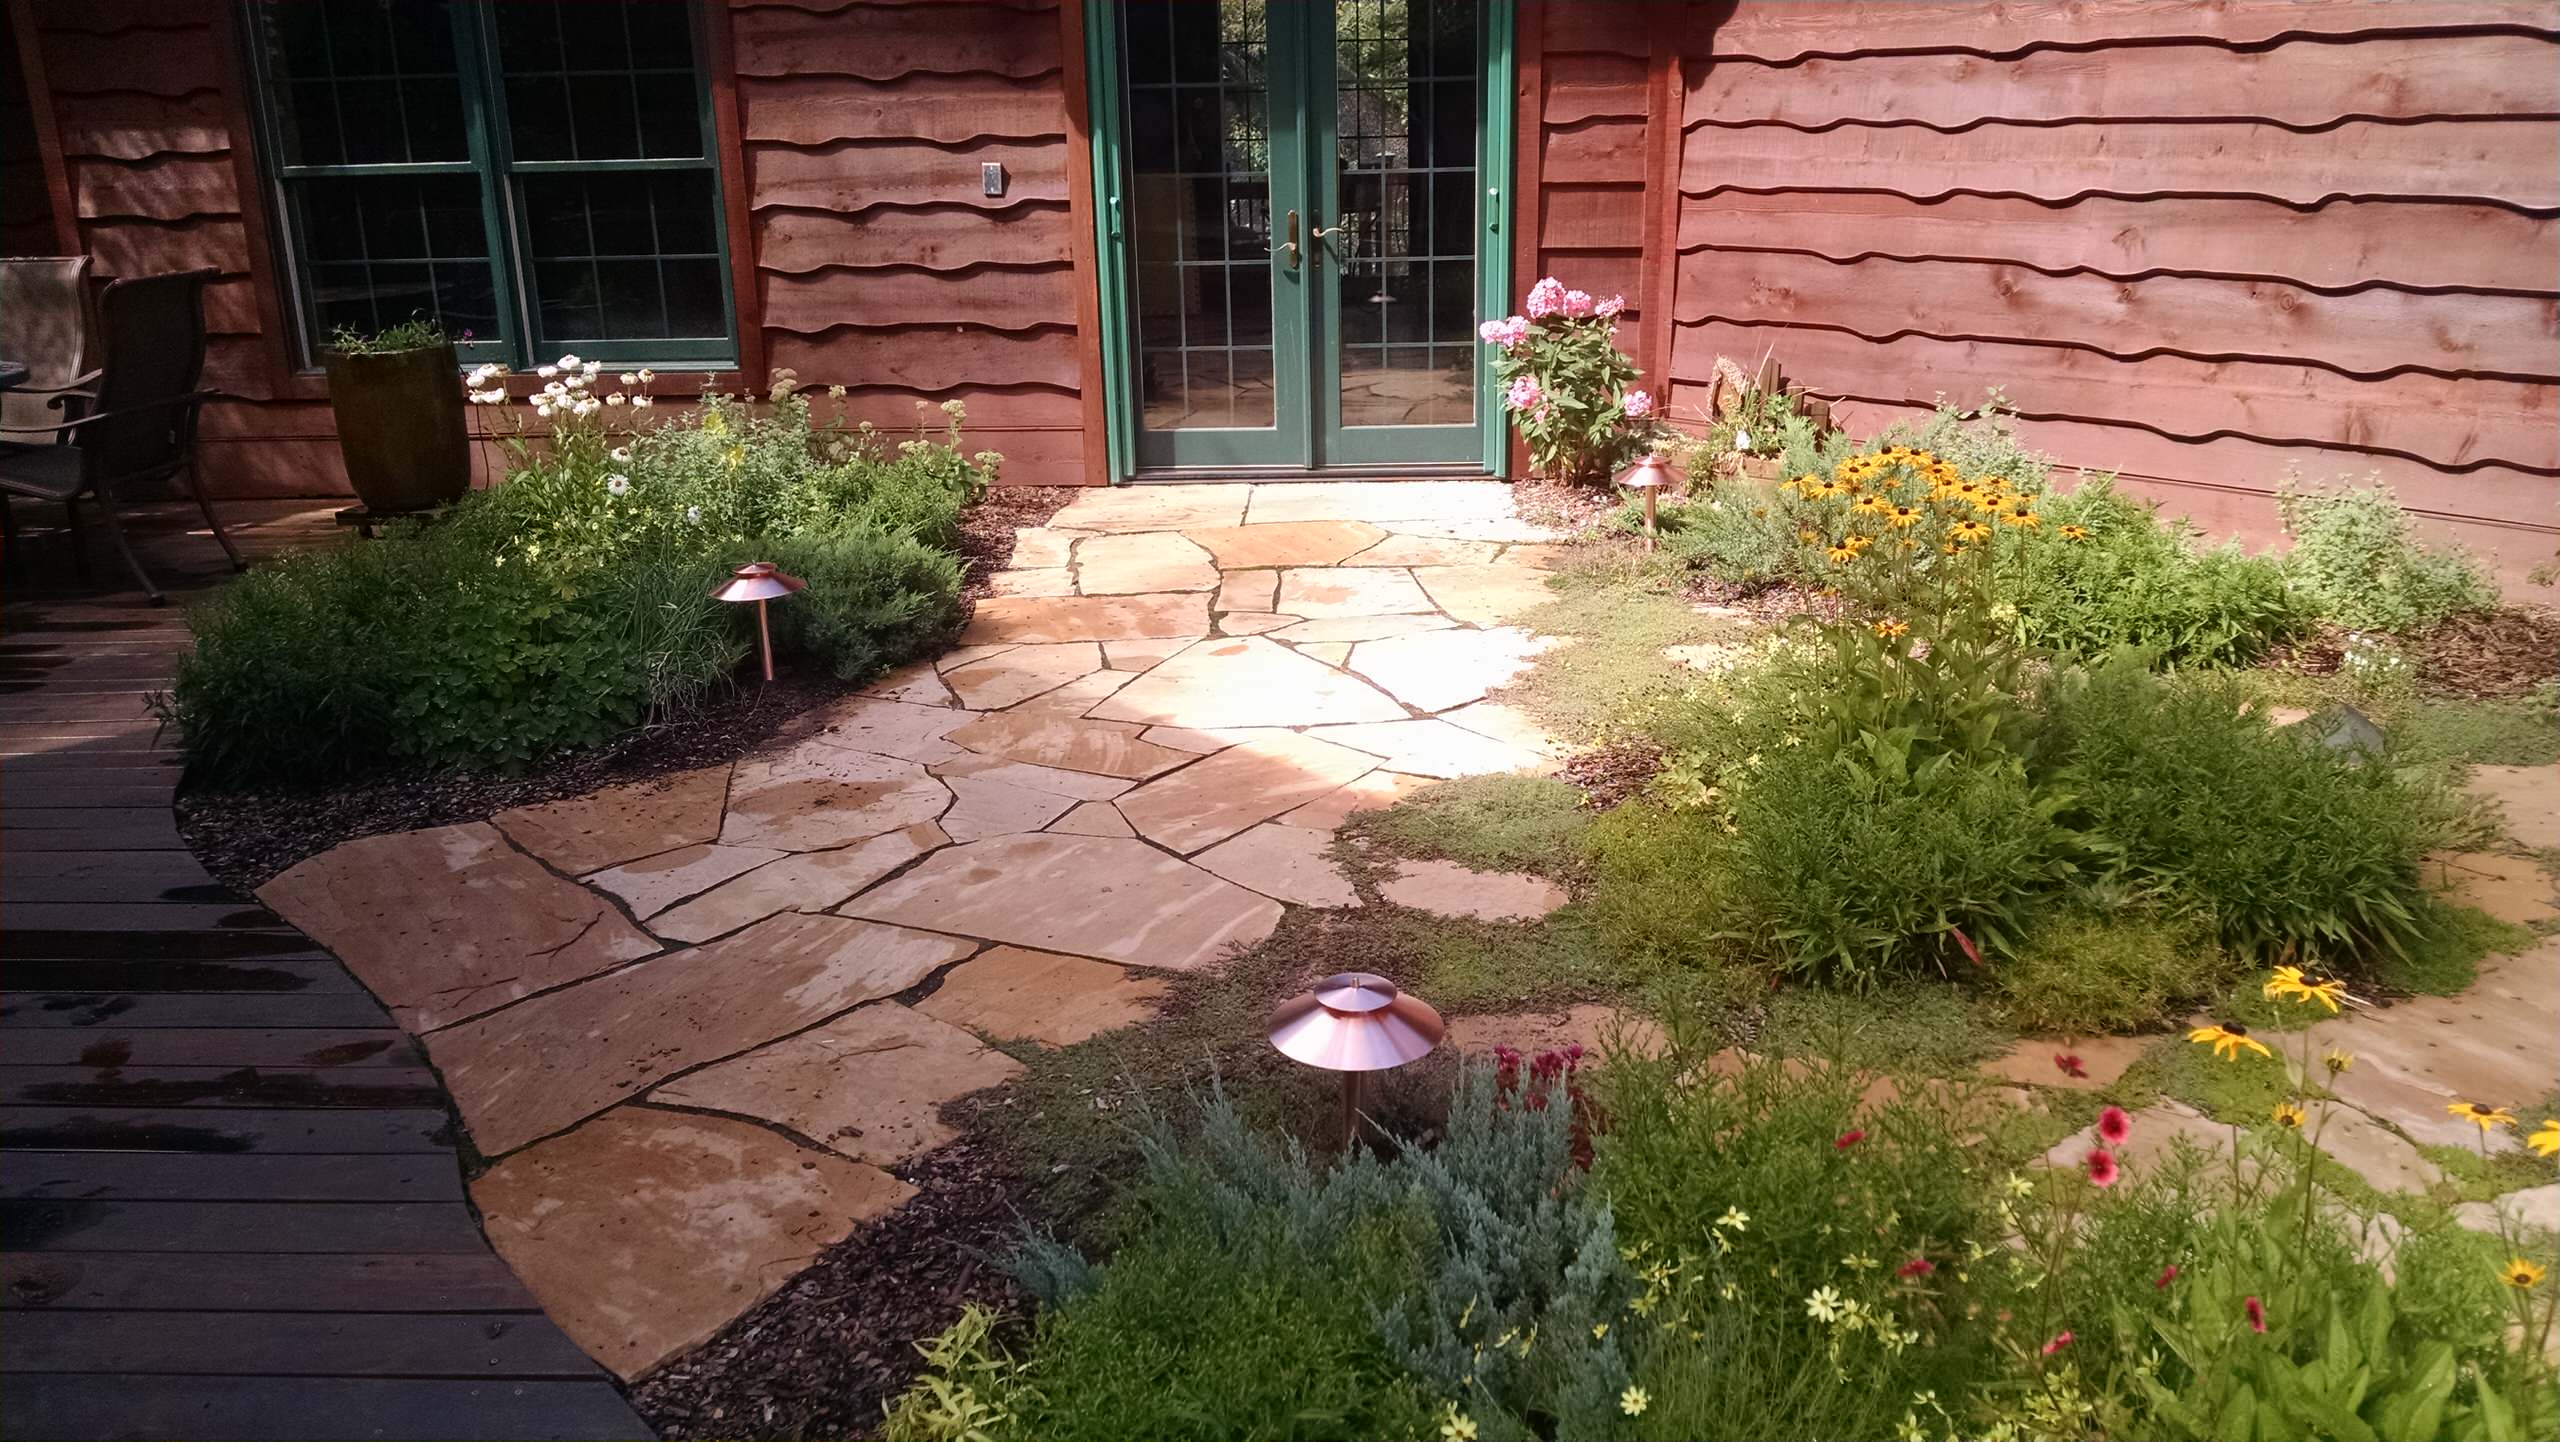 The flagstone and gareden on the live roof